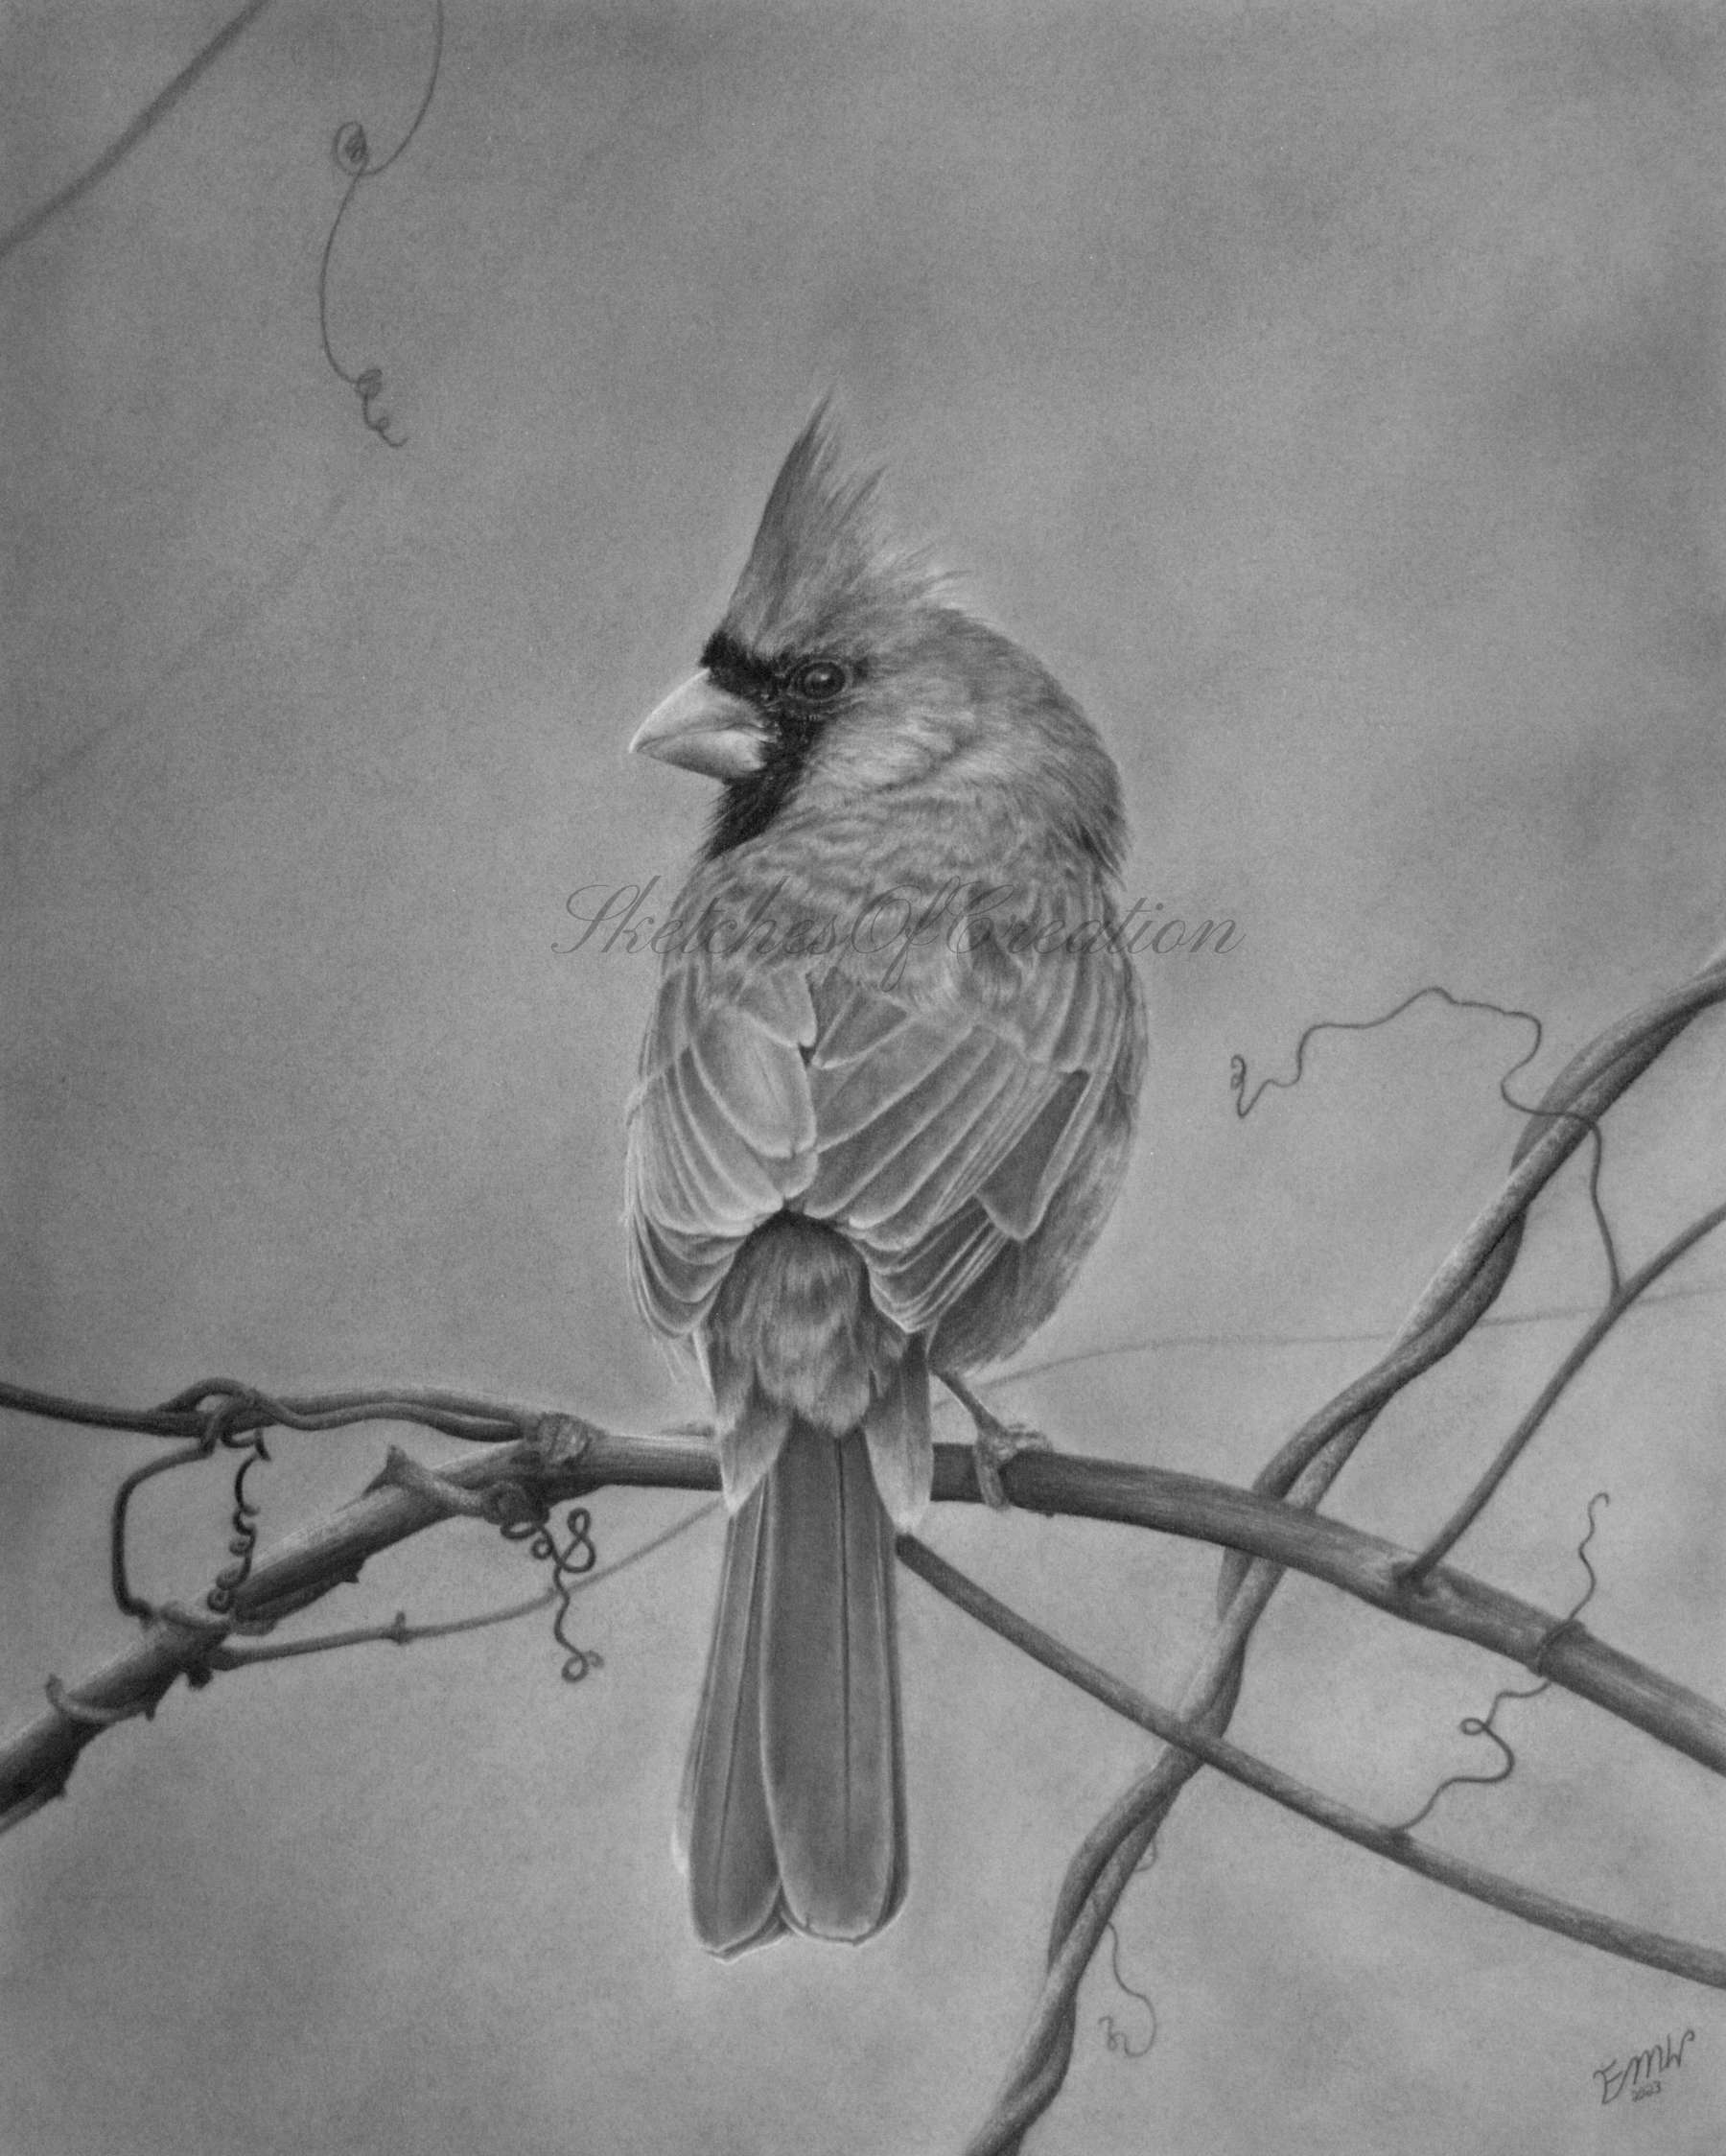 A drawing of a Cardinal sitting on vines